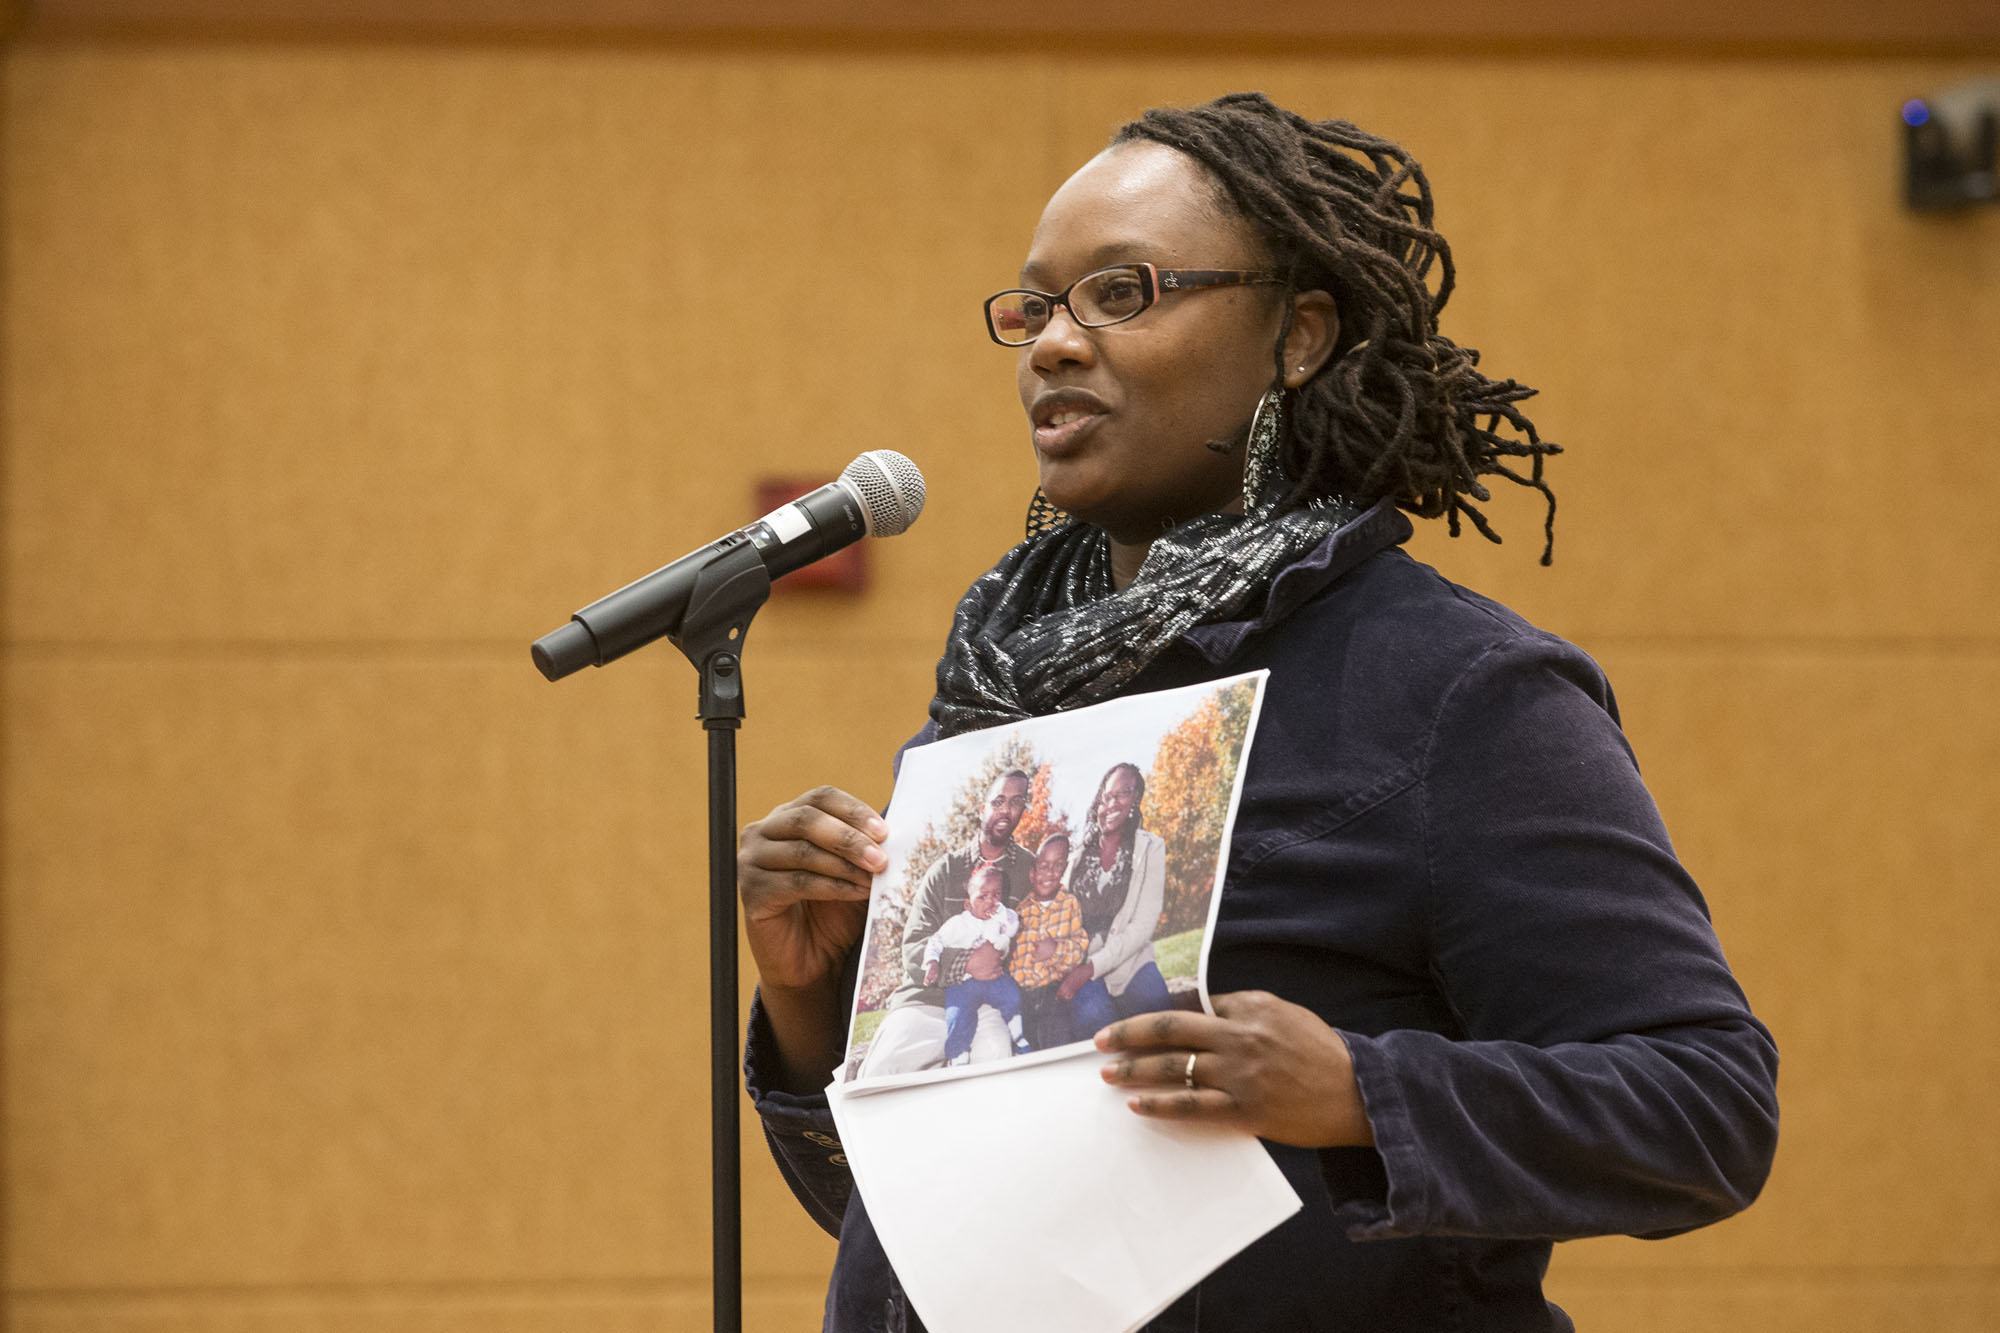 Tobiya Andrews holding a picture of her family and speaking into a microphone